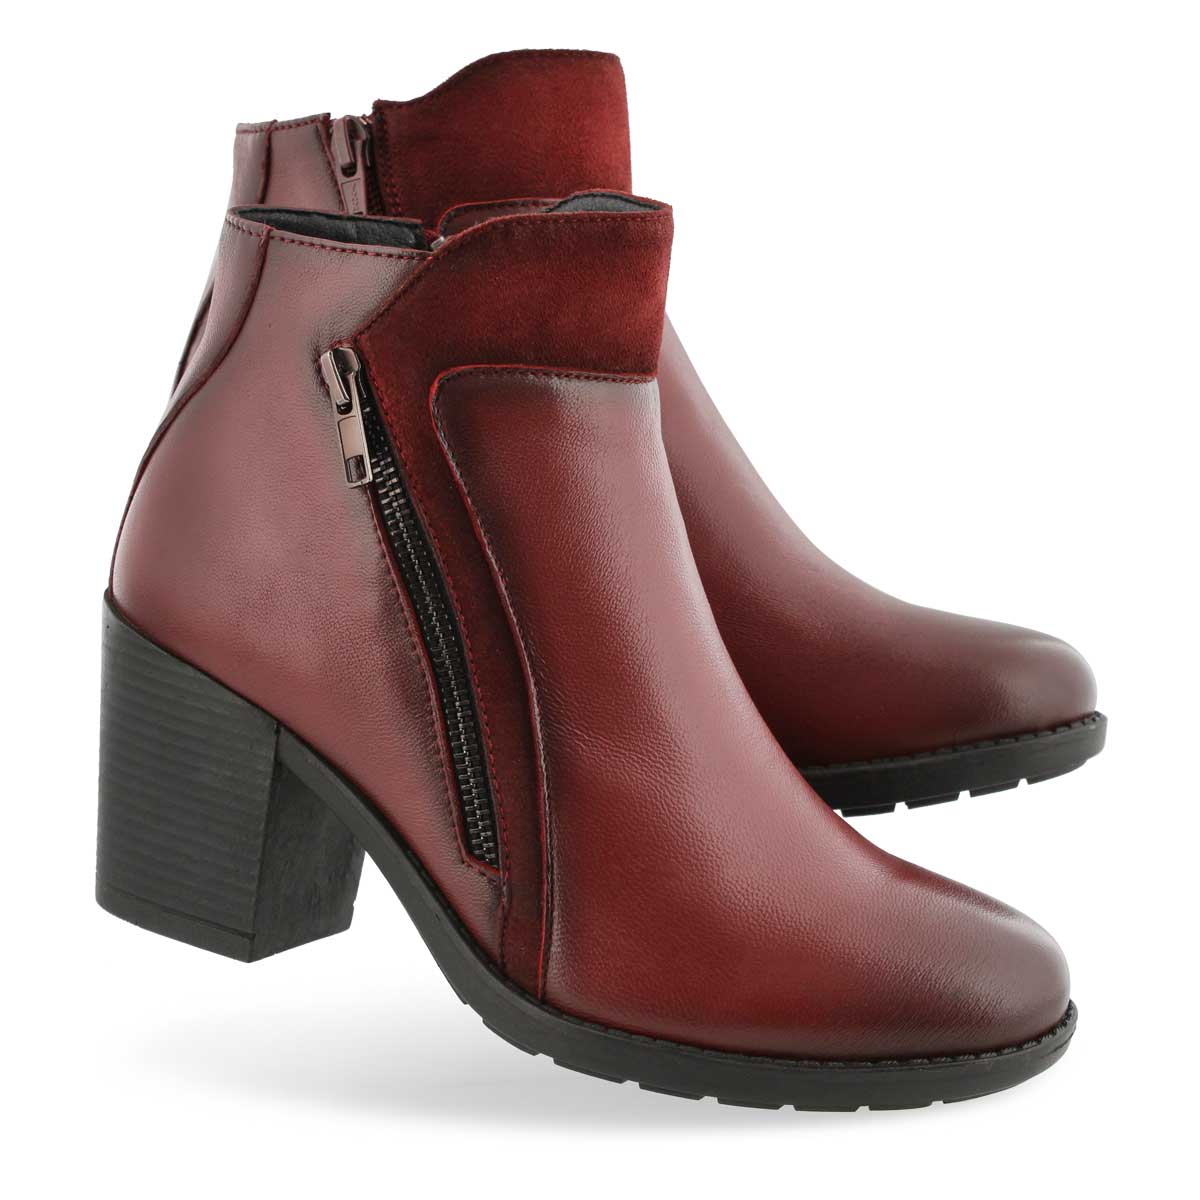 SoftMoc Women's DAISEY red casual ankle boots | SoftMoc.com